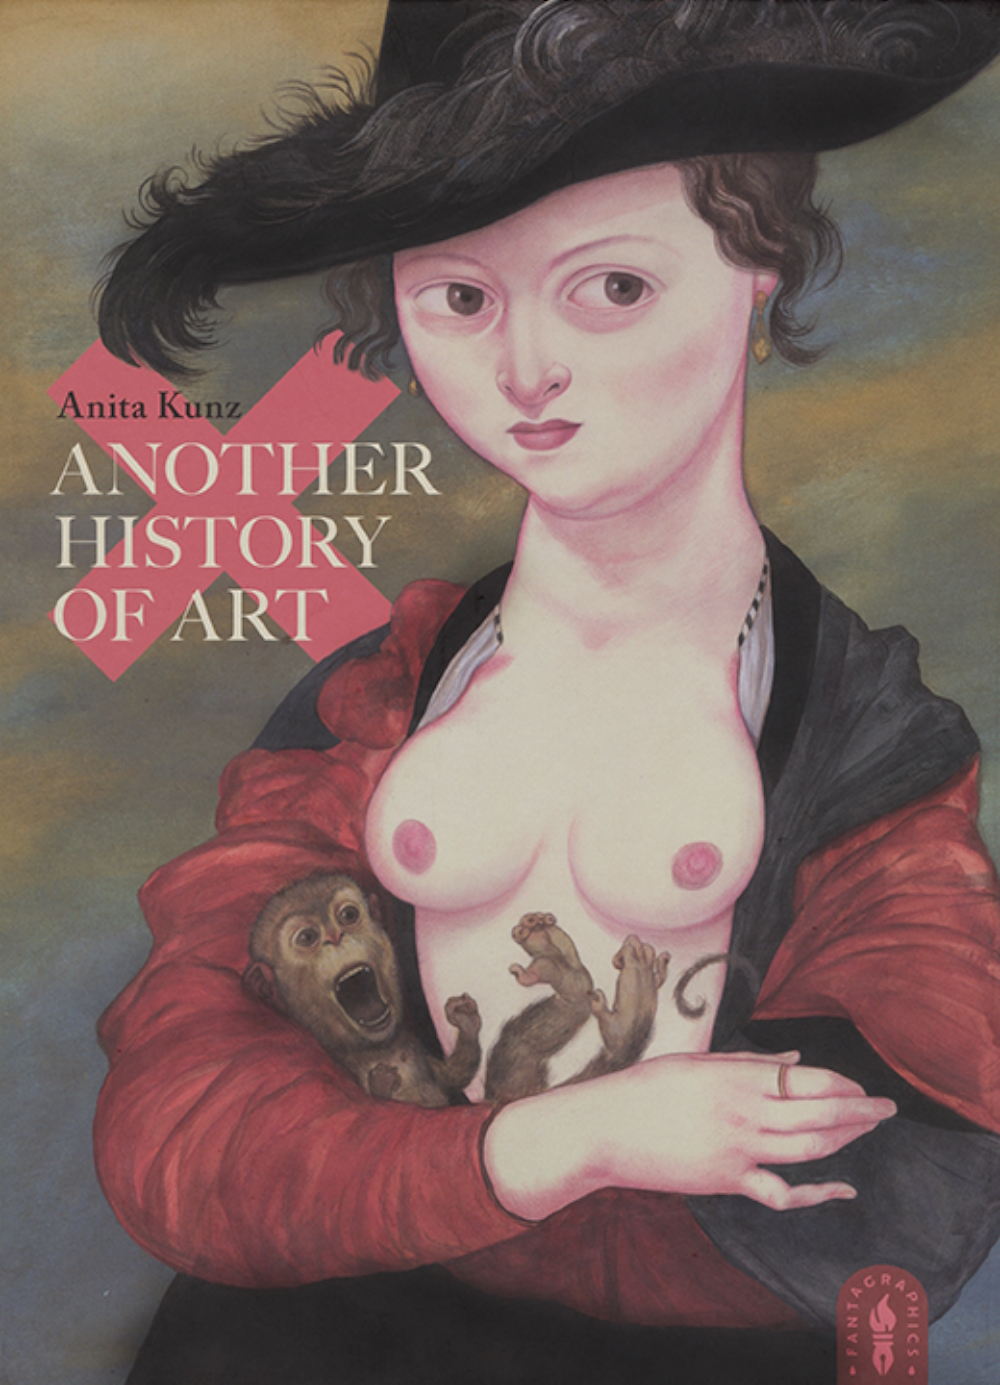 Cover of the satirical book 'Another History of Art'.  It 